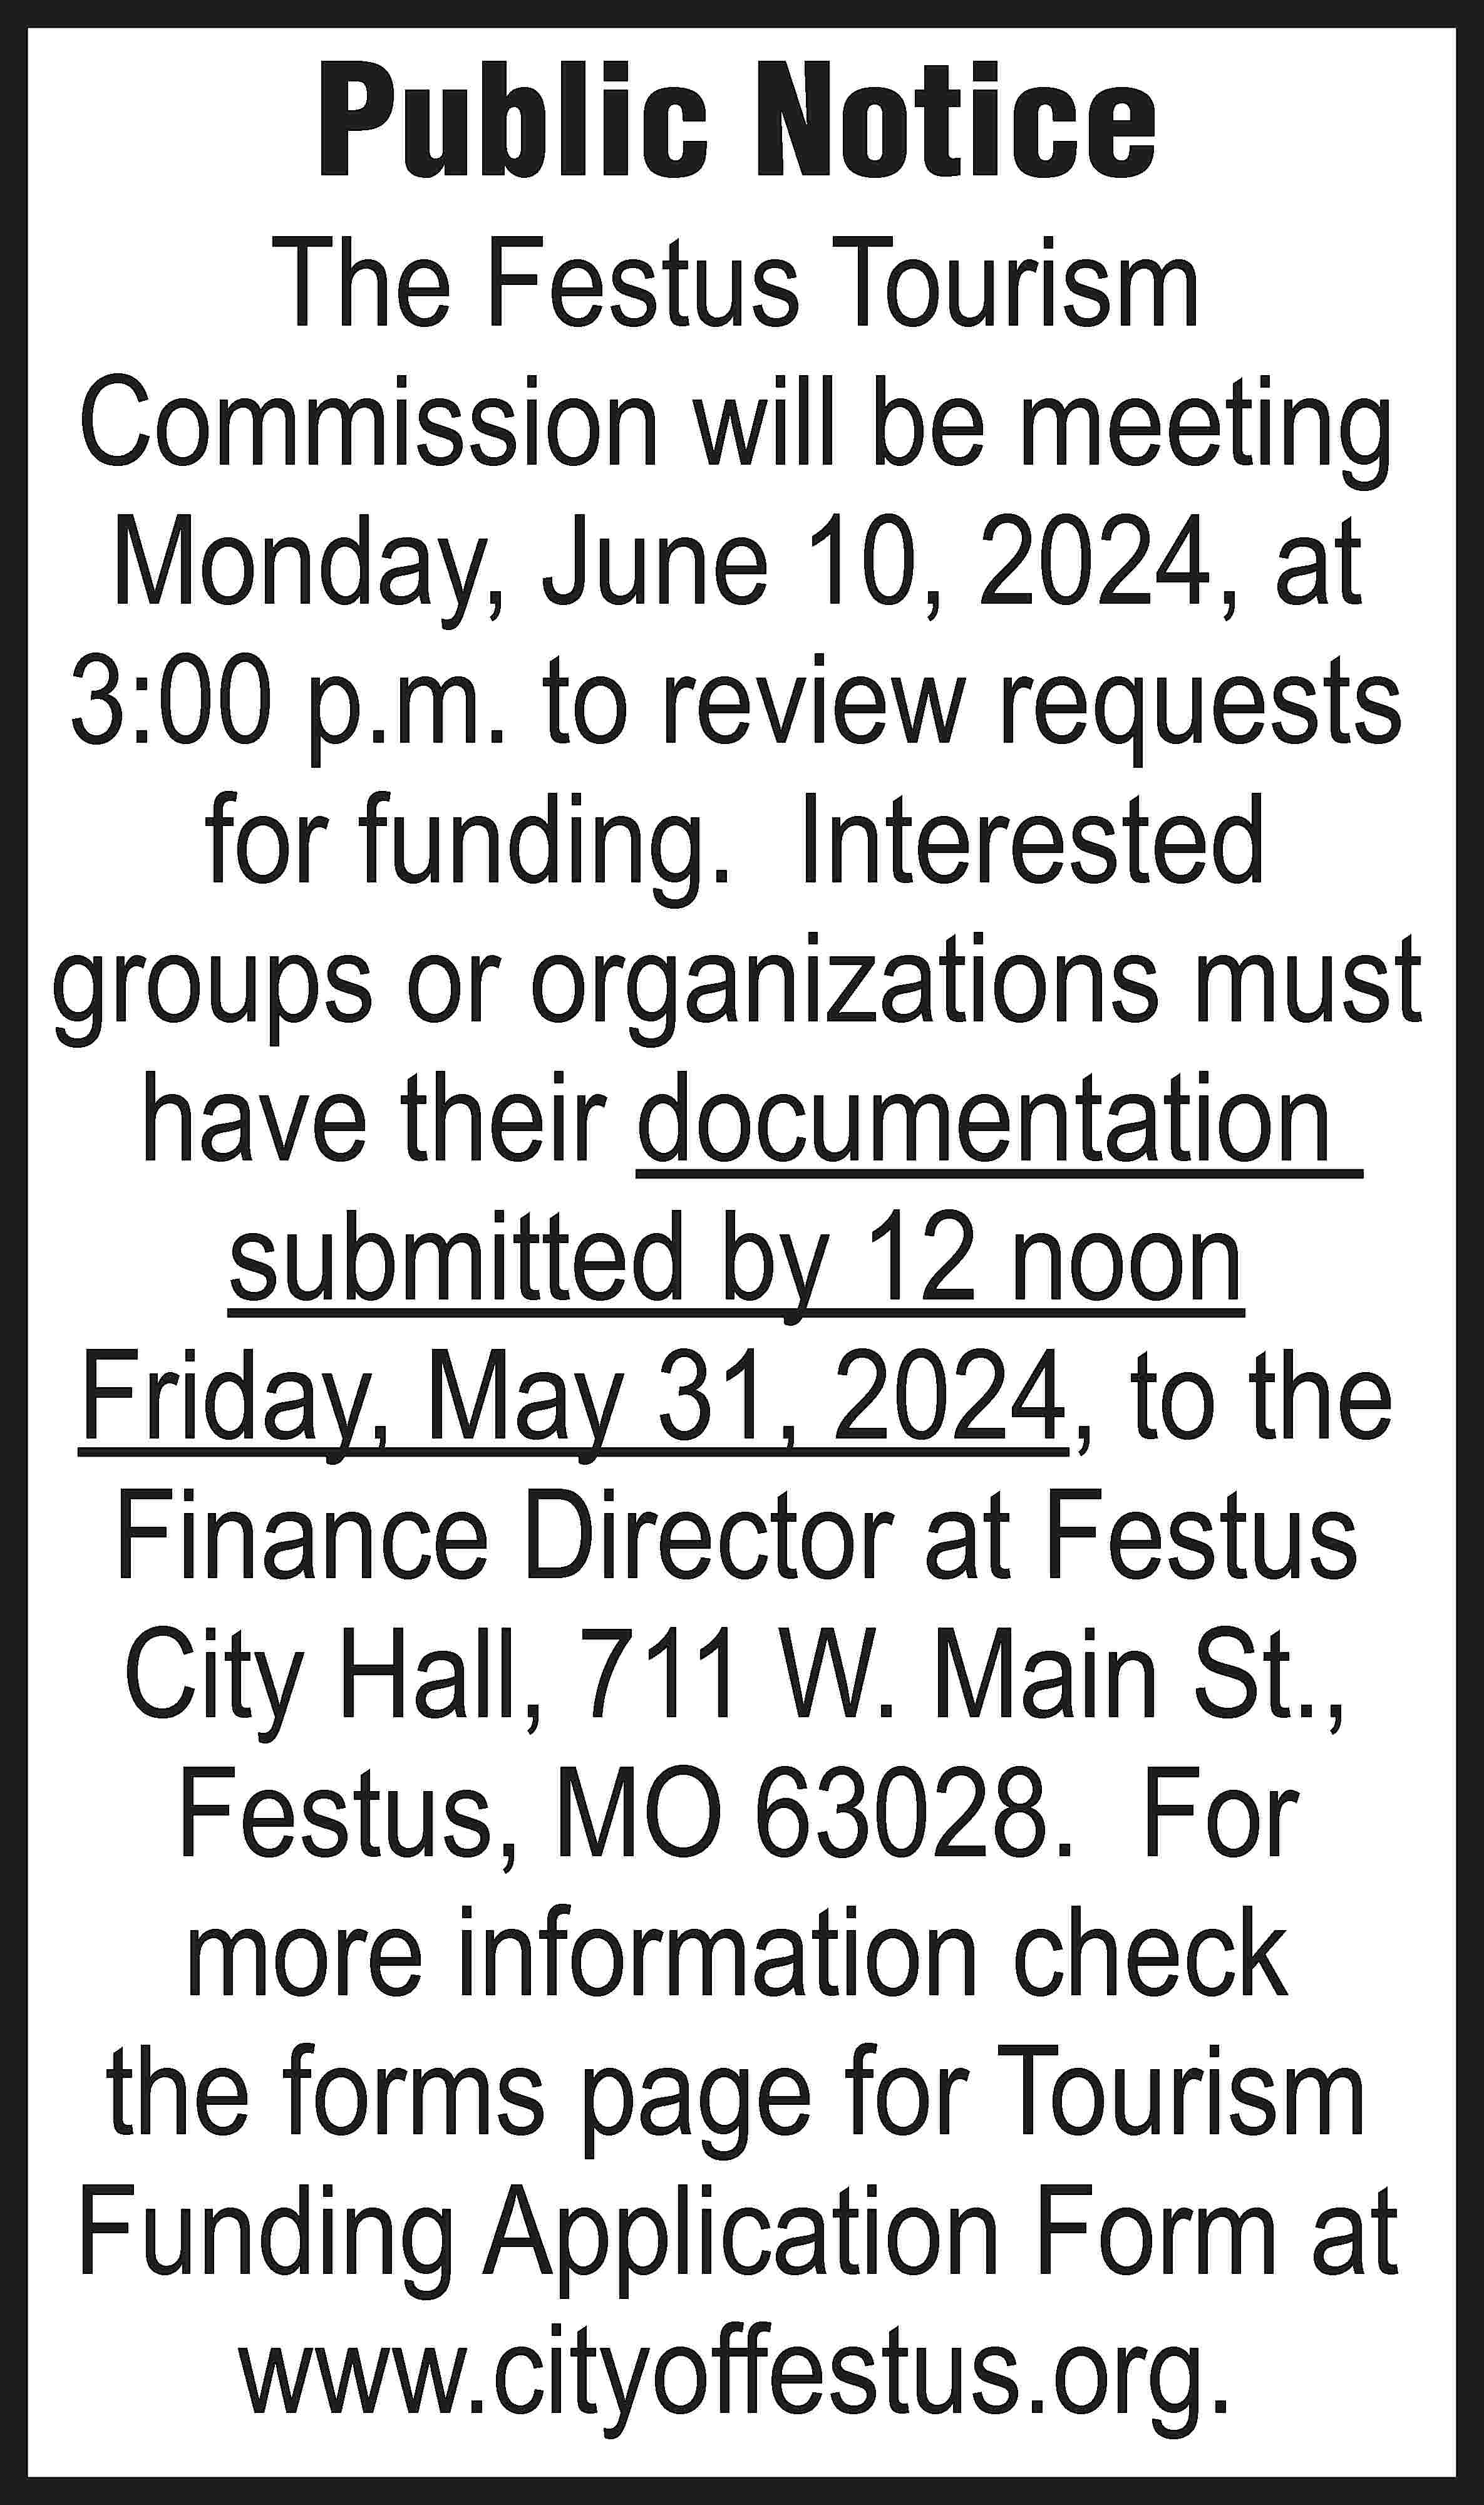 Public Notice The Festus Tourism  Public Notice The Festus Tourism Commission will be meeting Monday, June 10, 2024, at 3:00 p.m. to review requests for funding. Interested groups or organizations must have their documentation submitted by 12 noon Friday, May 31, 2024, to the Finance Director at Festus City Hall, 711 W. Main St., Festus, MO 63028. For more information check the forms page for Tourism Funding Application Form at www.cityoffestus.org.